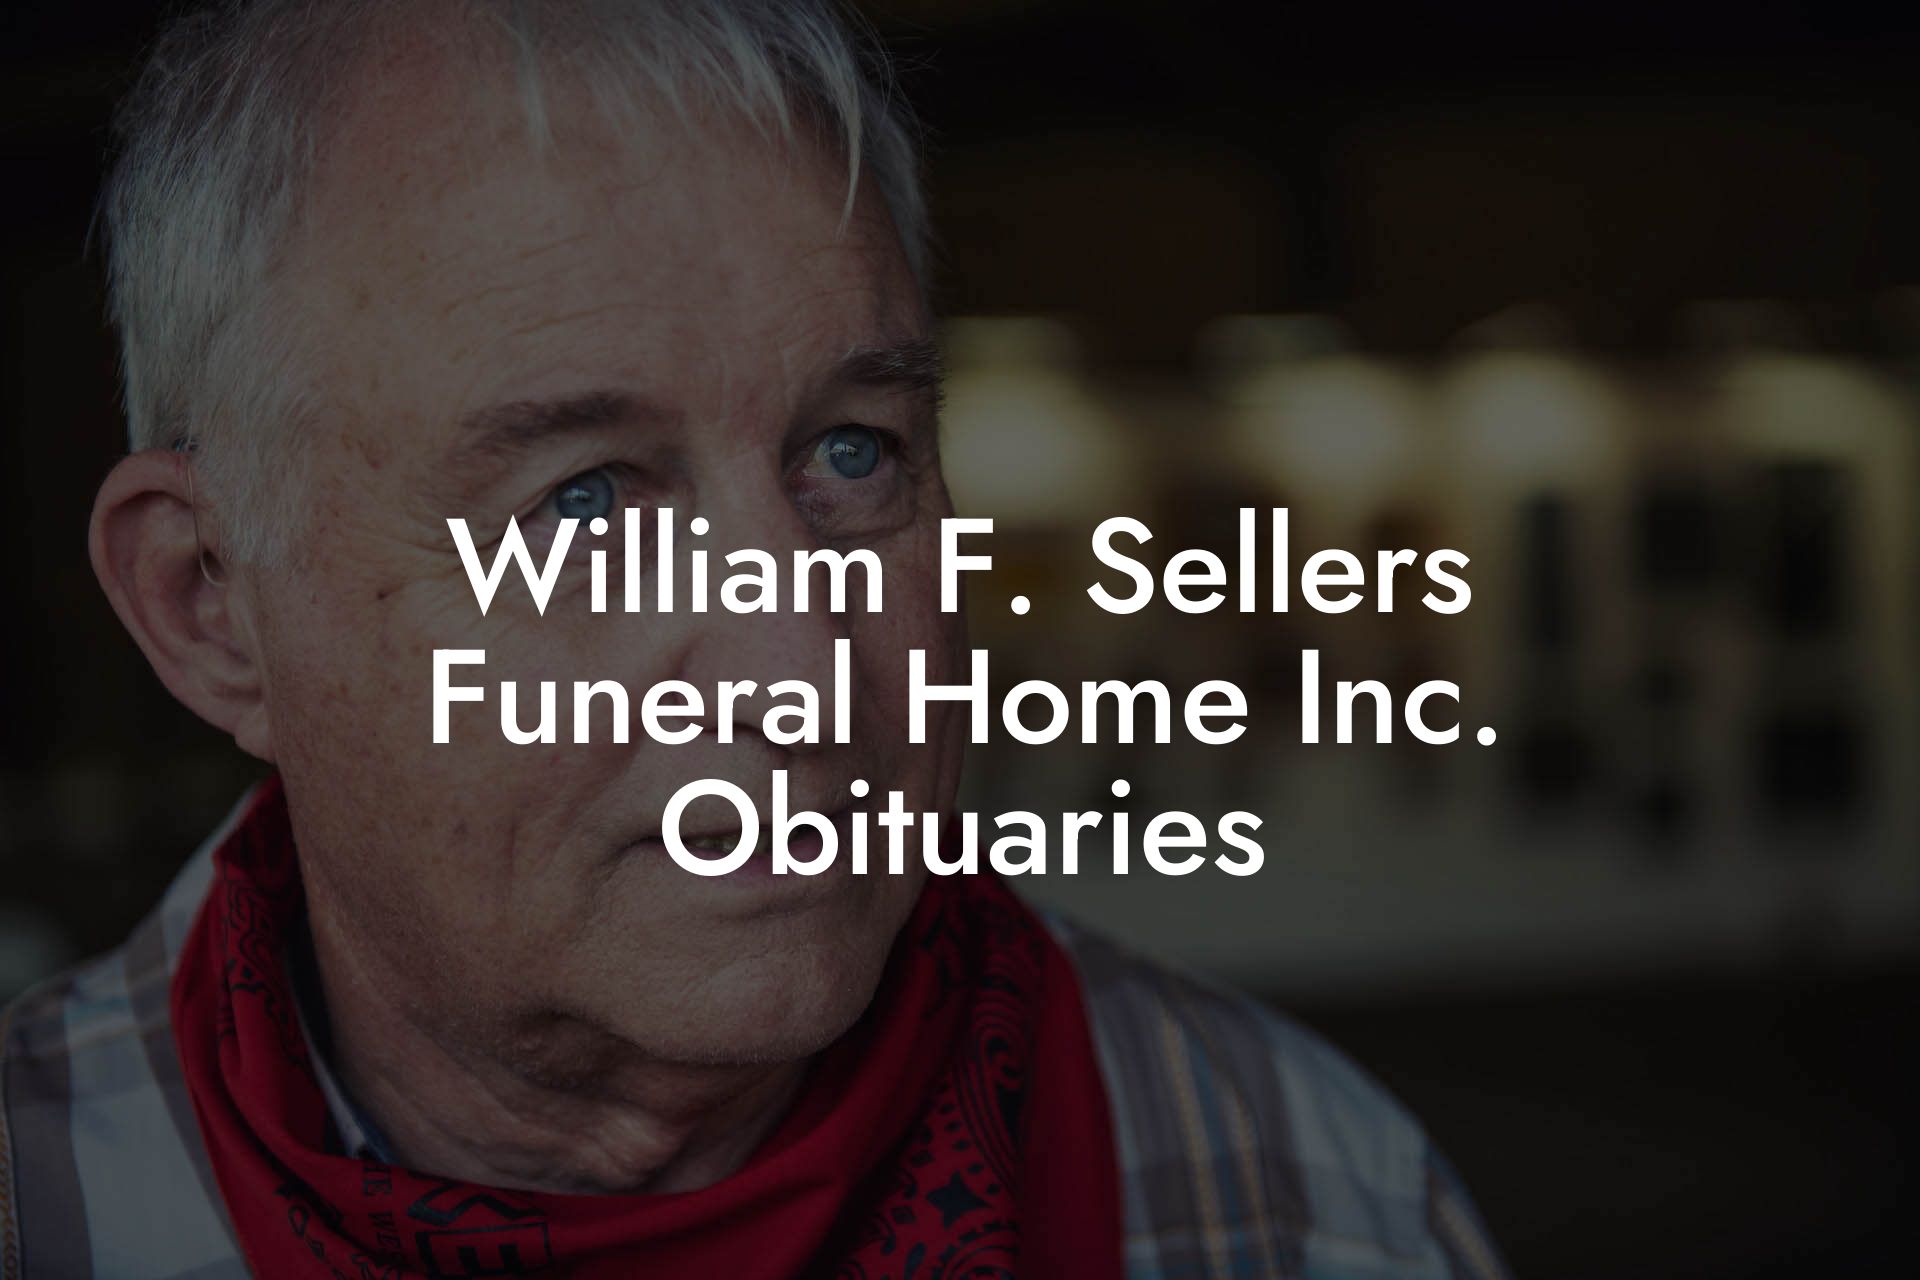 William F. Sellers Funeral Home Inc. Obituaries